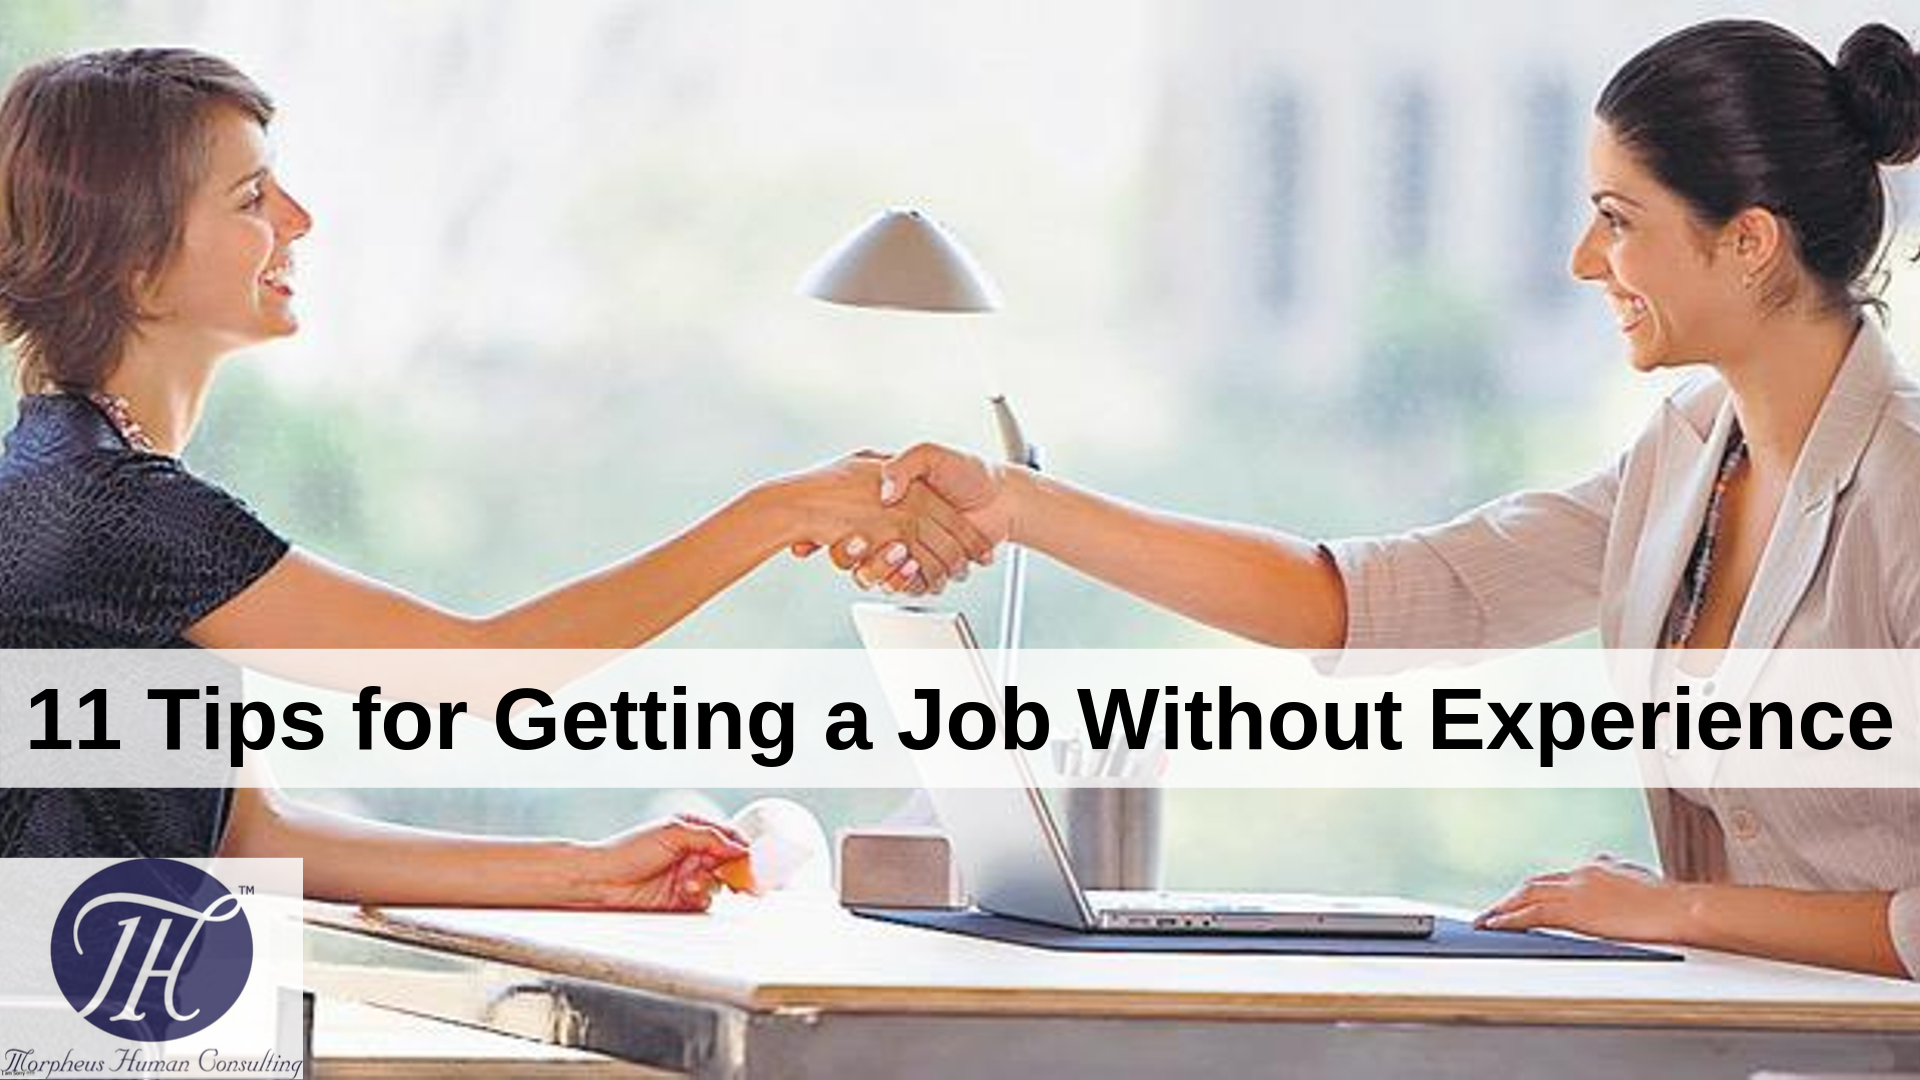 11 Tips for Getting a Job Without Experience! Morpheus Human Consulting